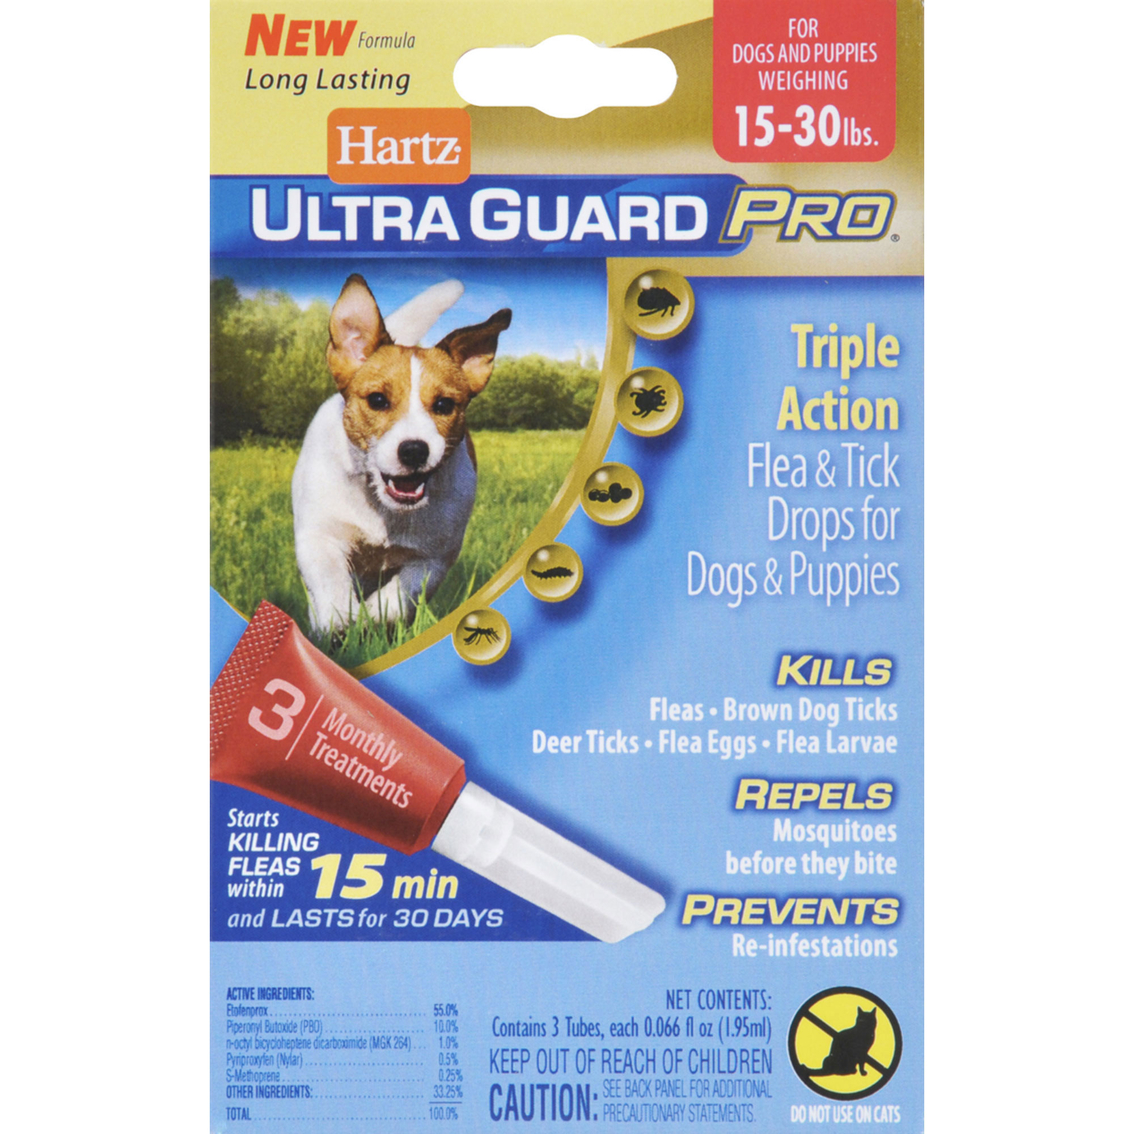 Hartz Ultra Guard Pro Flea And Tick Drops For Dogs And Puppies 15 To 30 Lb., Flea & Tick, Household